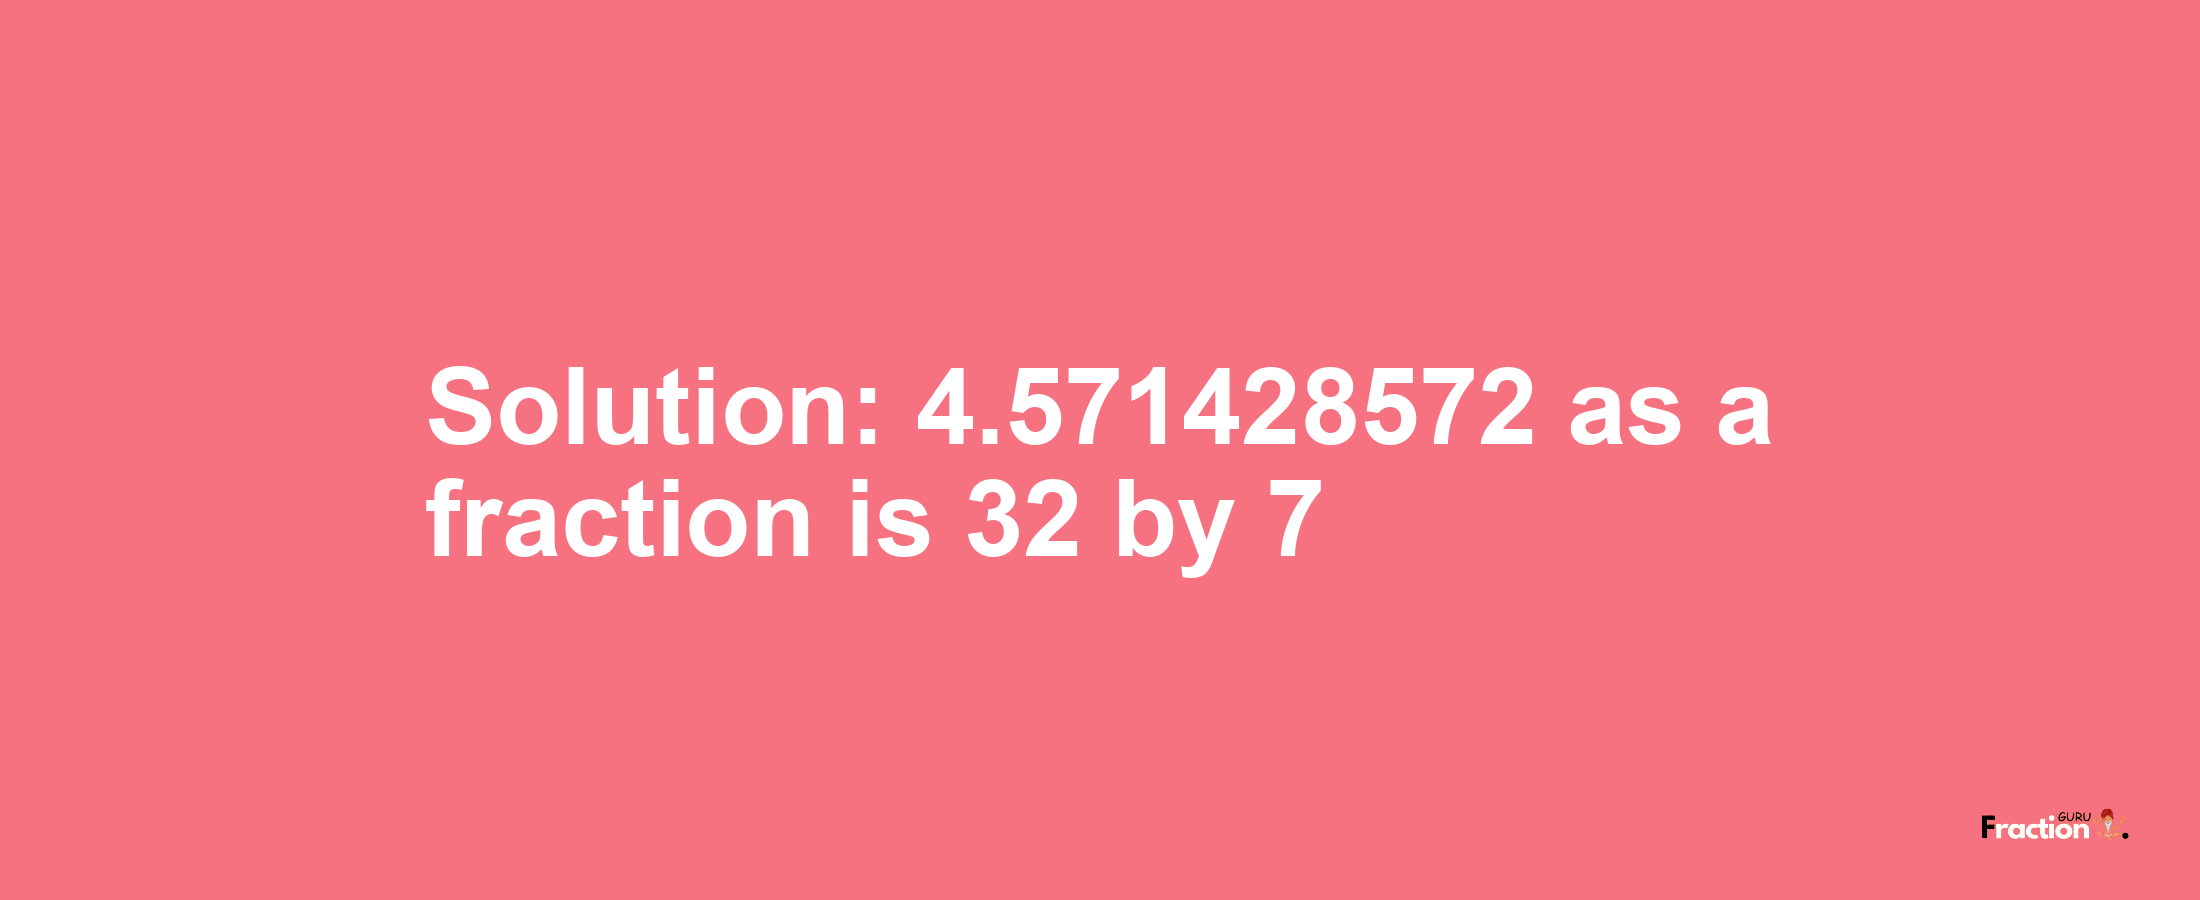 Solution:4.571428572 as a fraction is 32/7